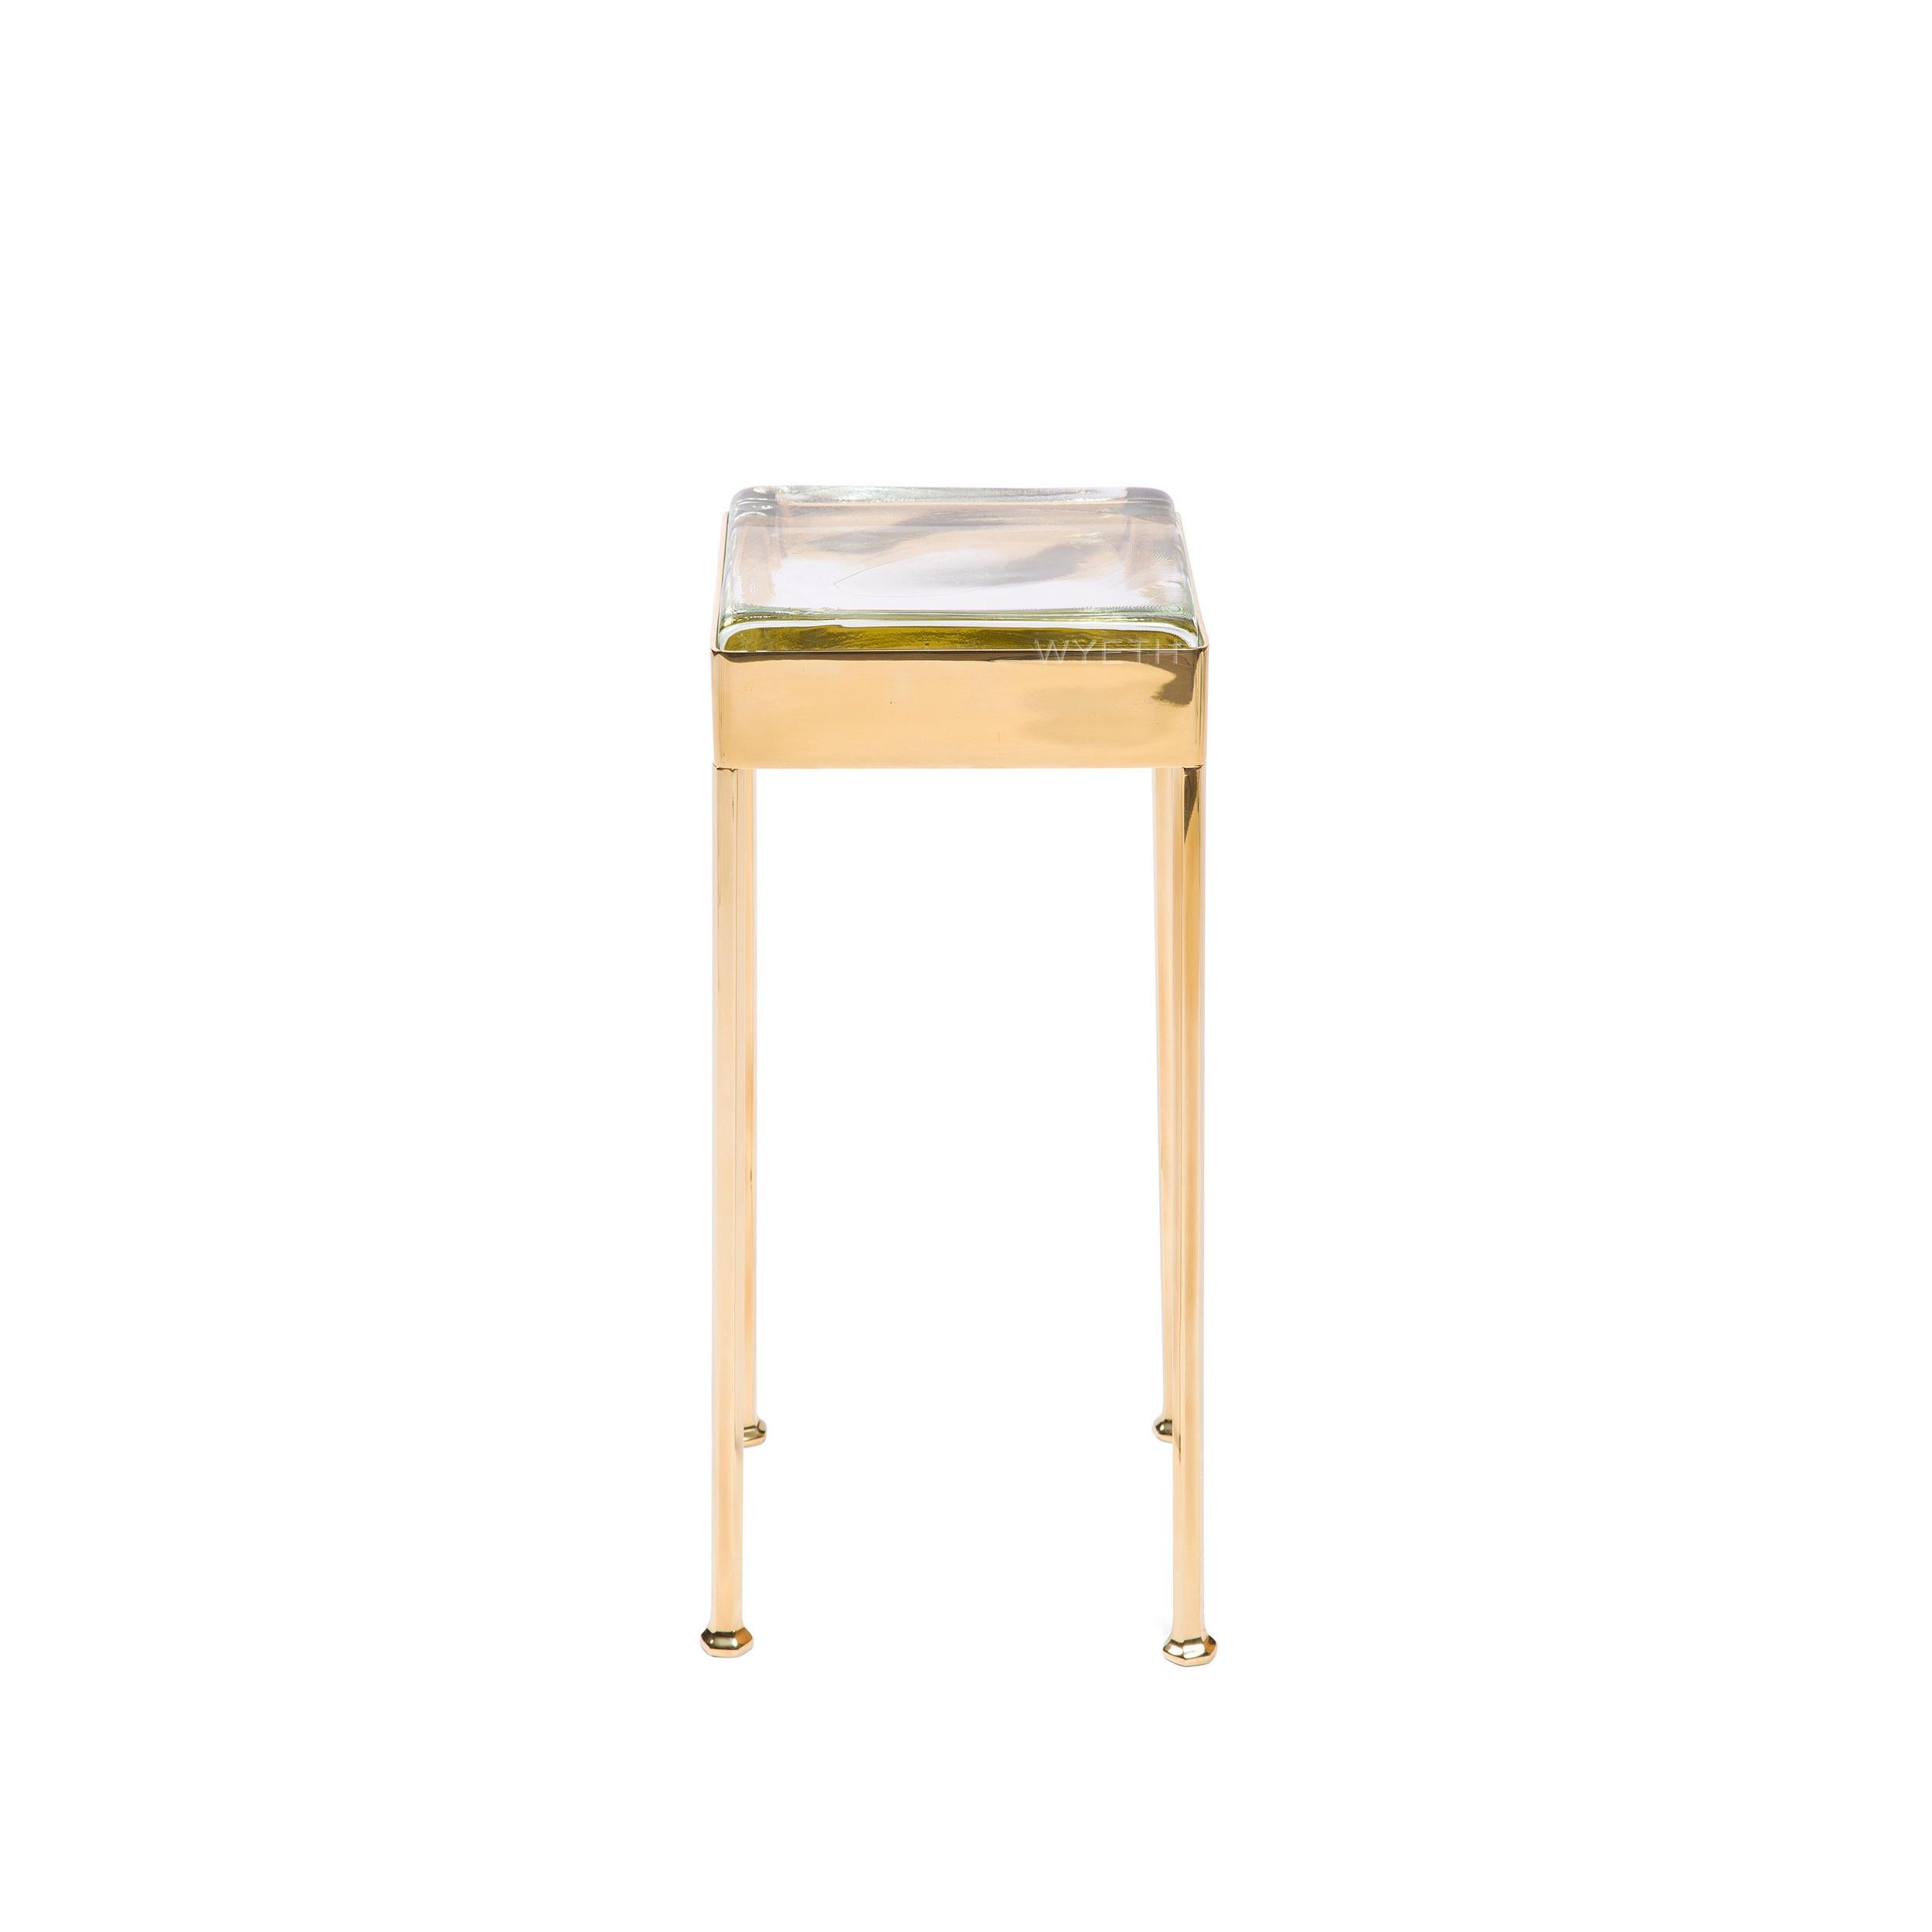 A bronze studio-made cocktail table, having a square banded apron holding a glass tile that rests on four faceted legs.